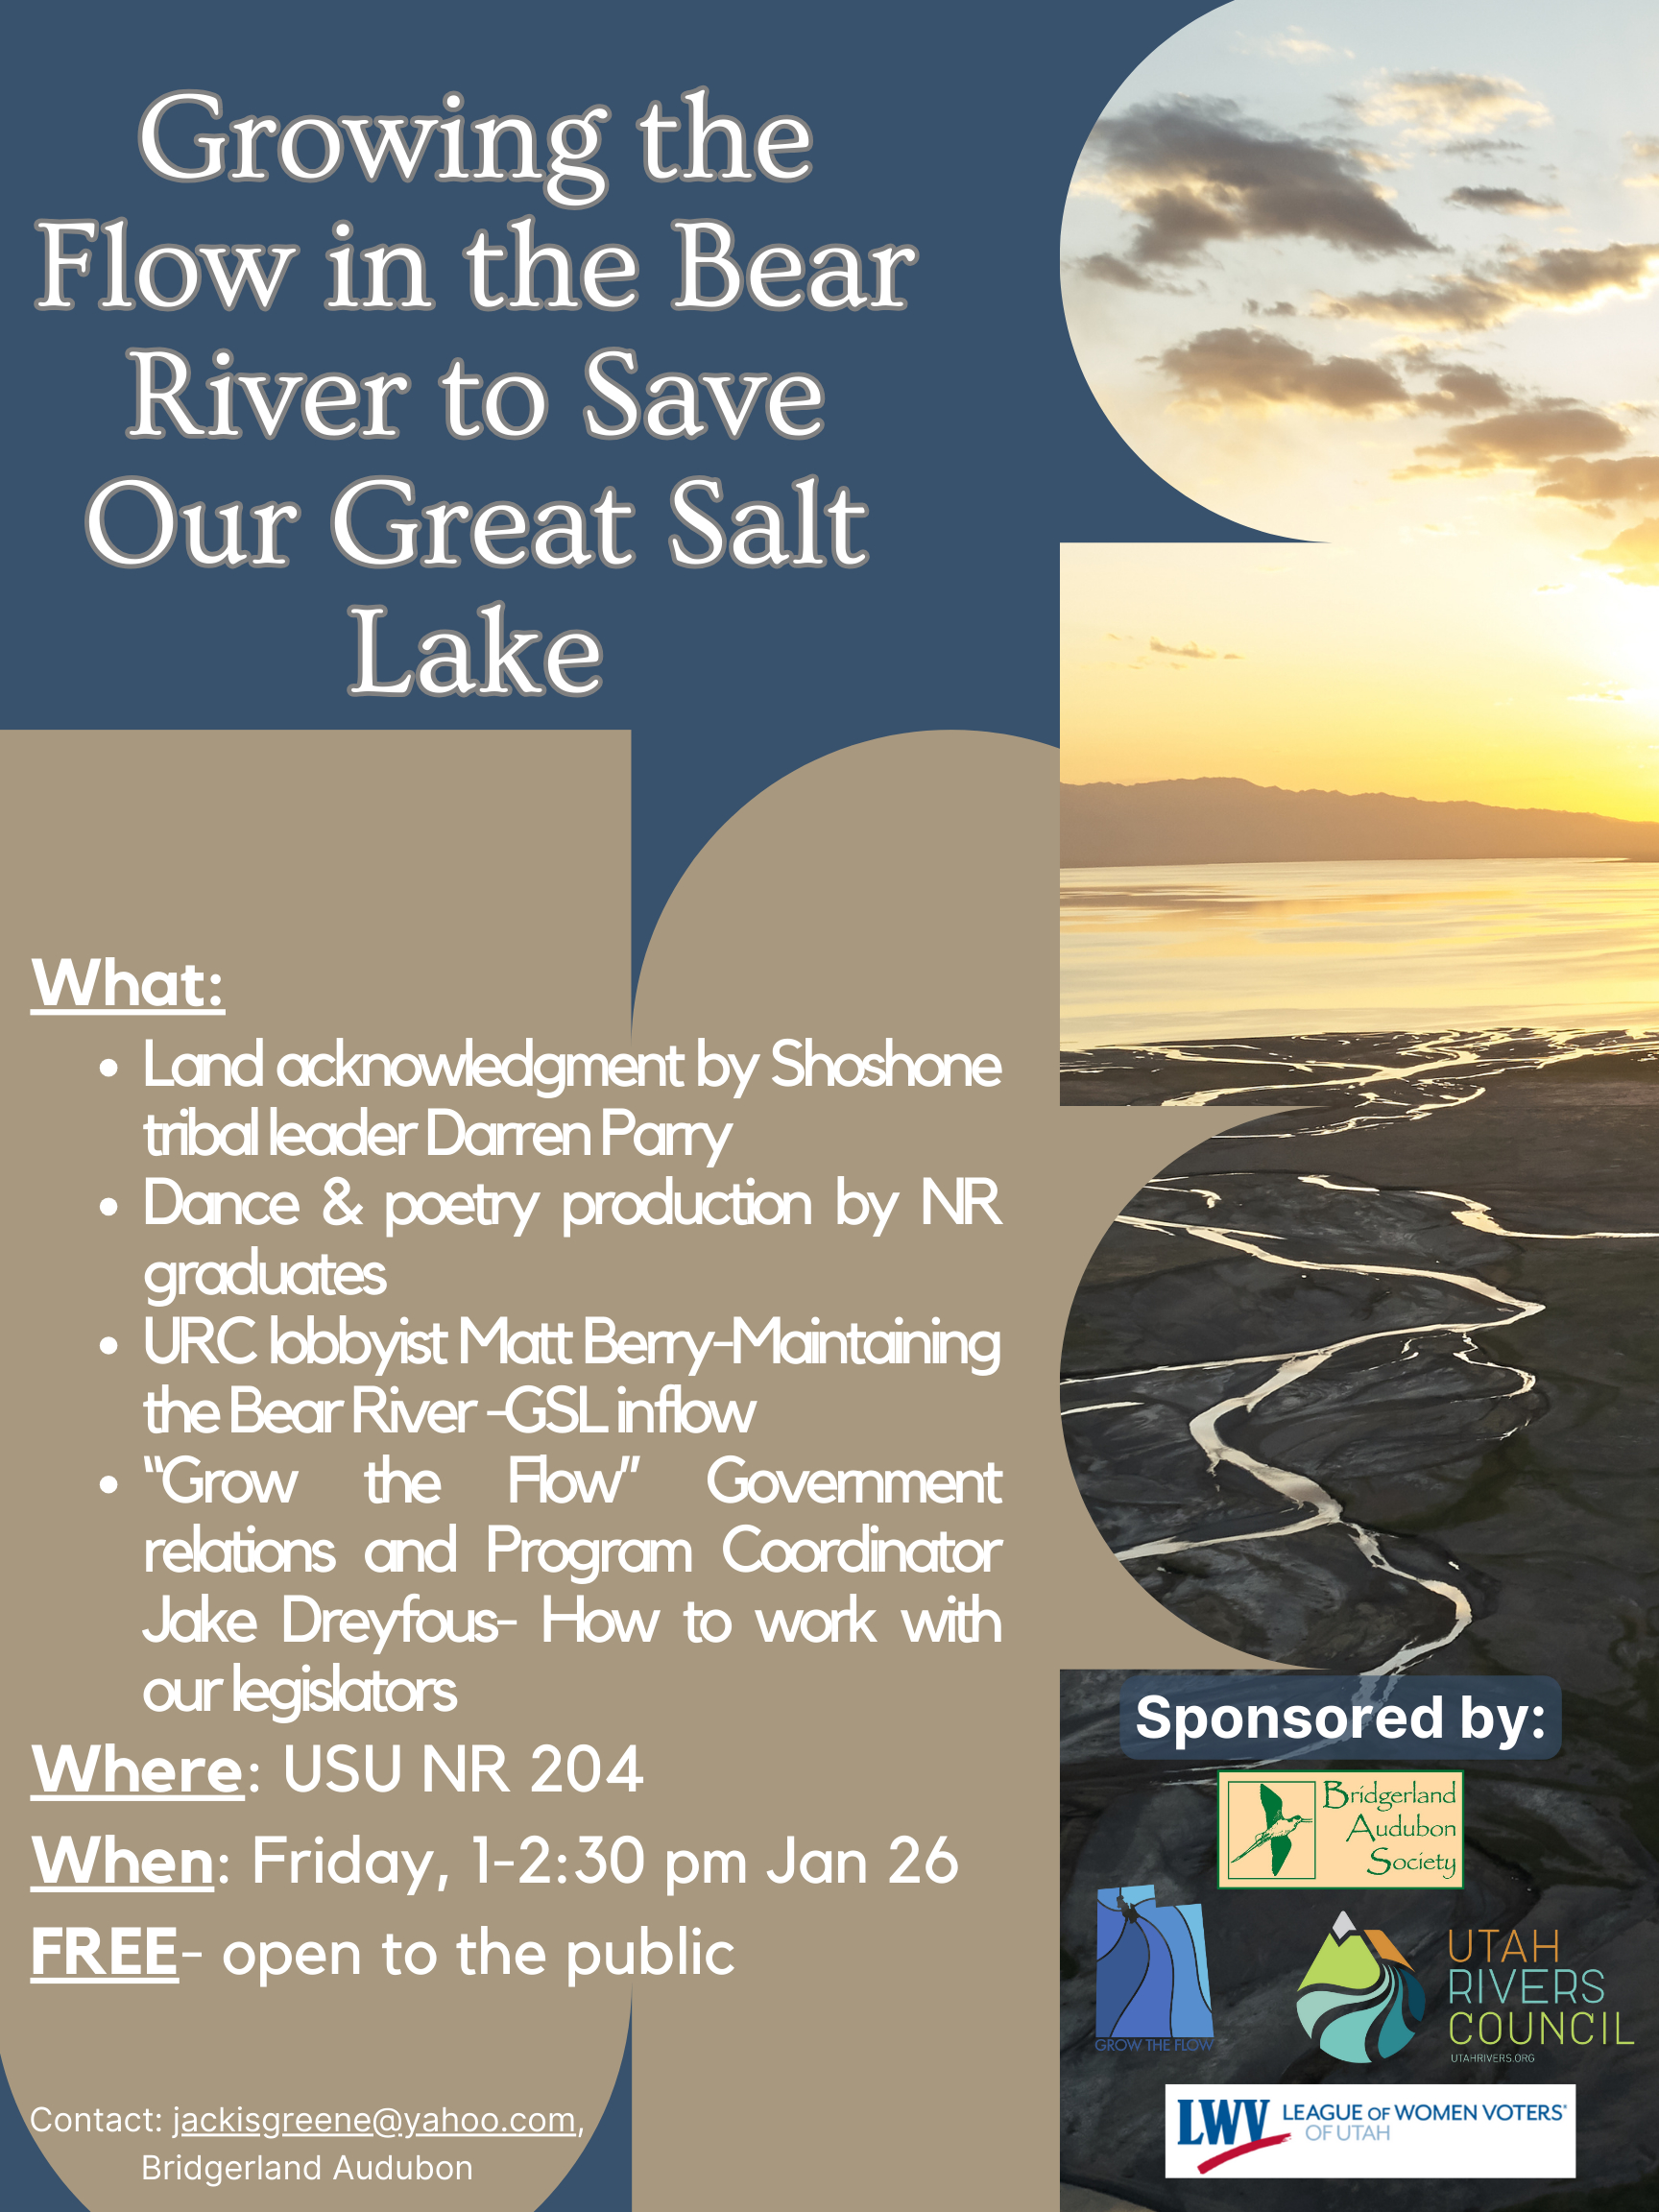 Growing the Flow in the Bear River to Save our Great Salt Lake, January 26, 2024, USU NR 204, 1:00 pm - 2:30 pm